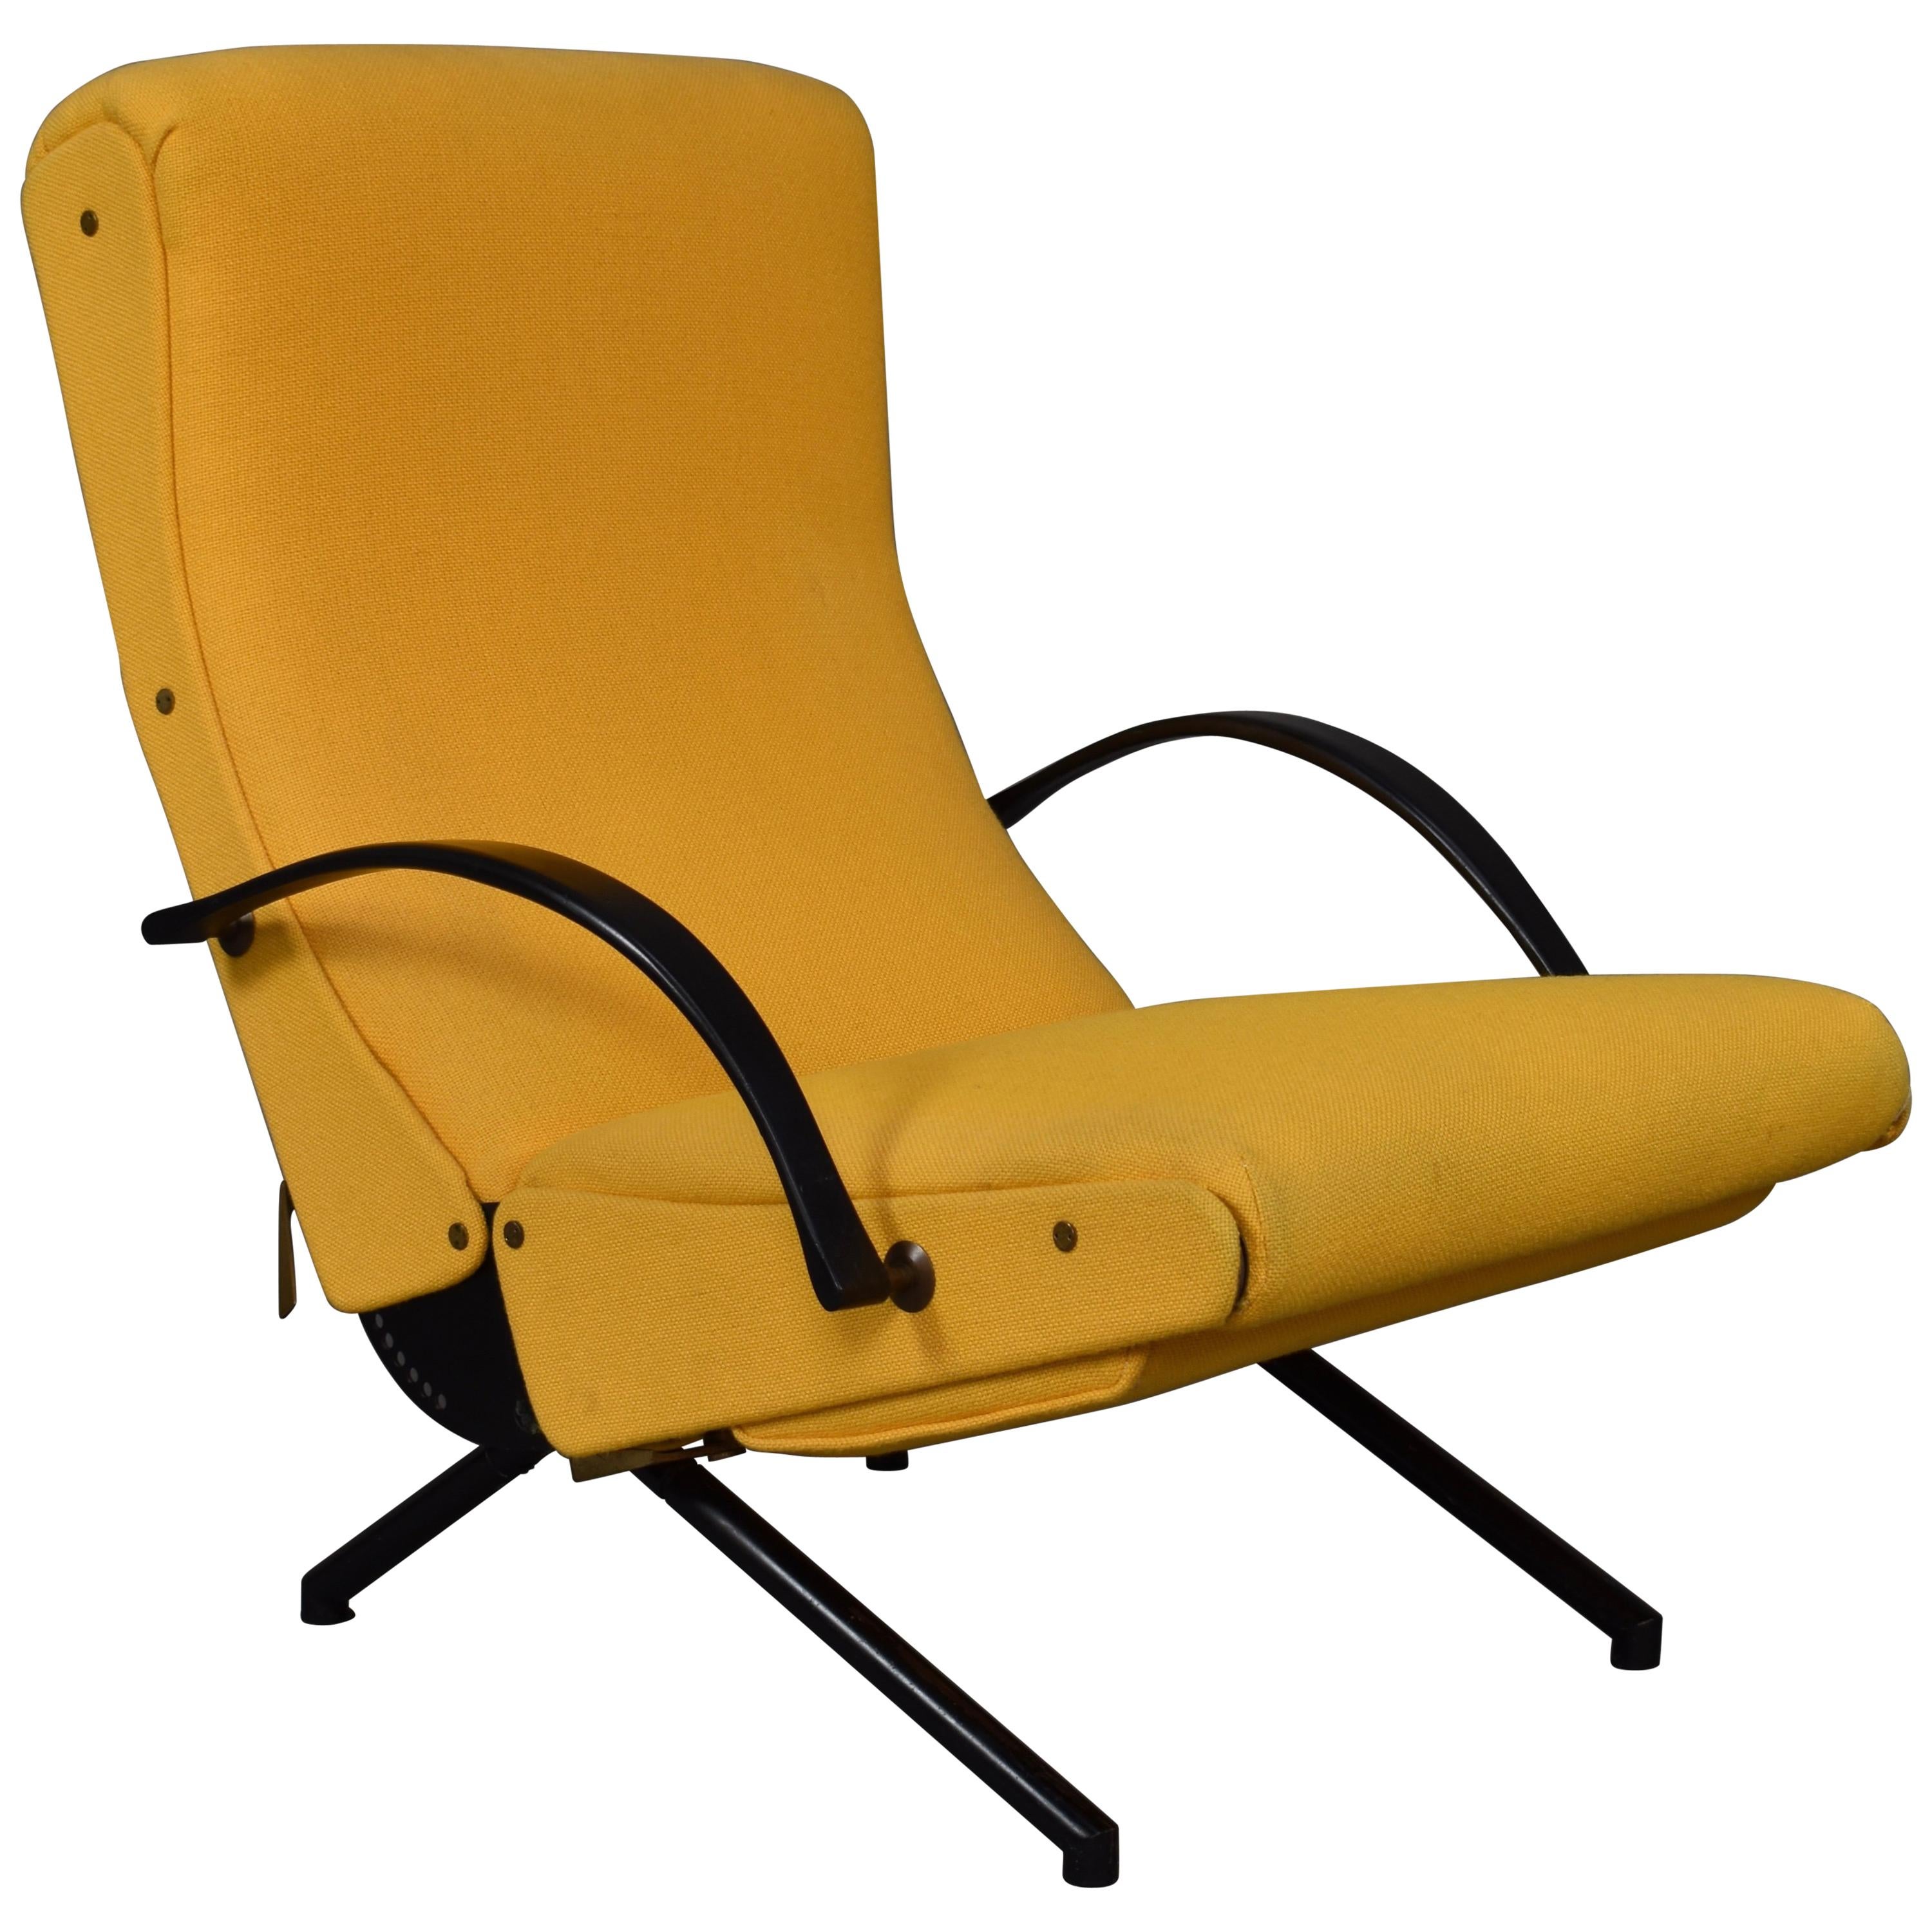 First Edition P40 Lounge Chair by Borsani for Tecno, Italy, circa 1950